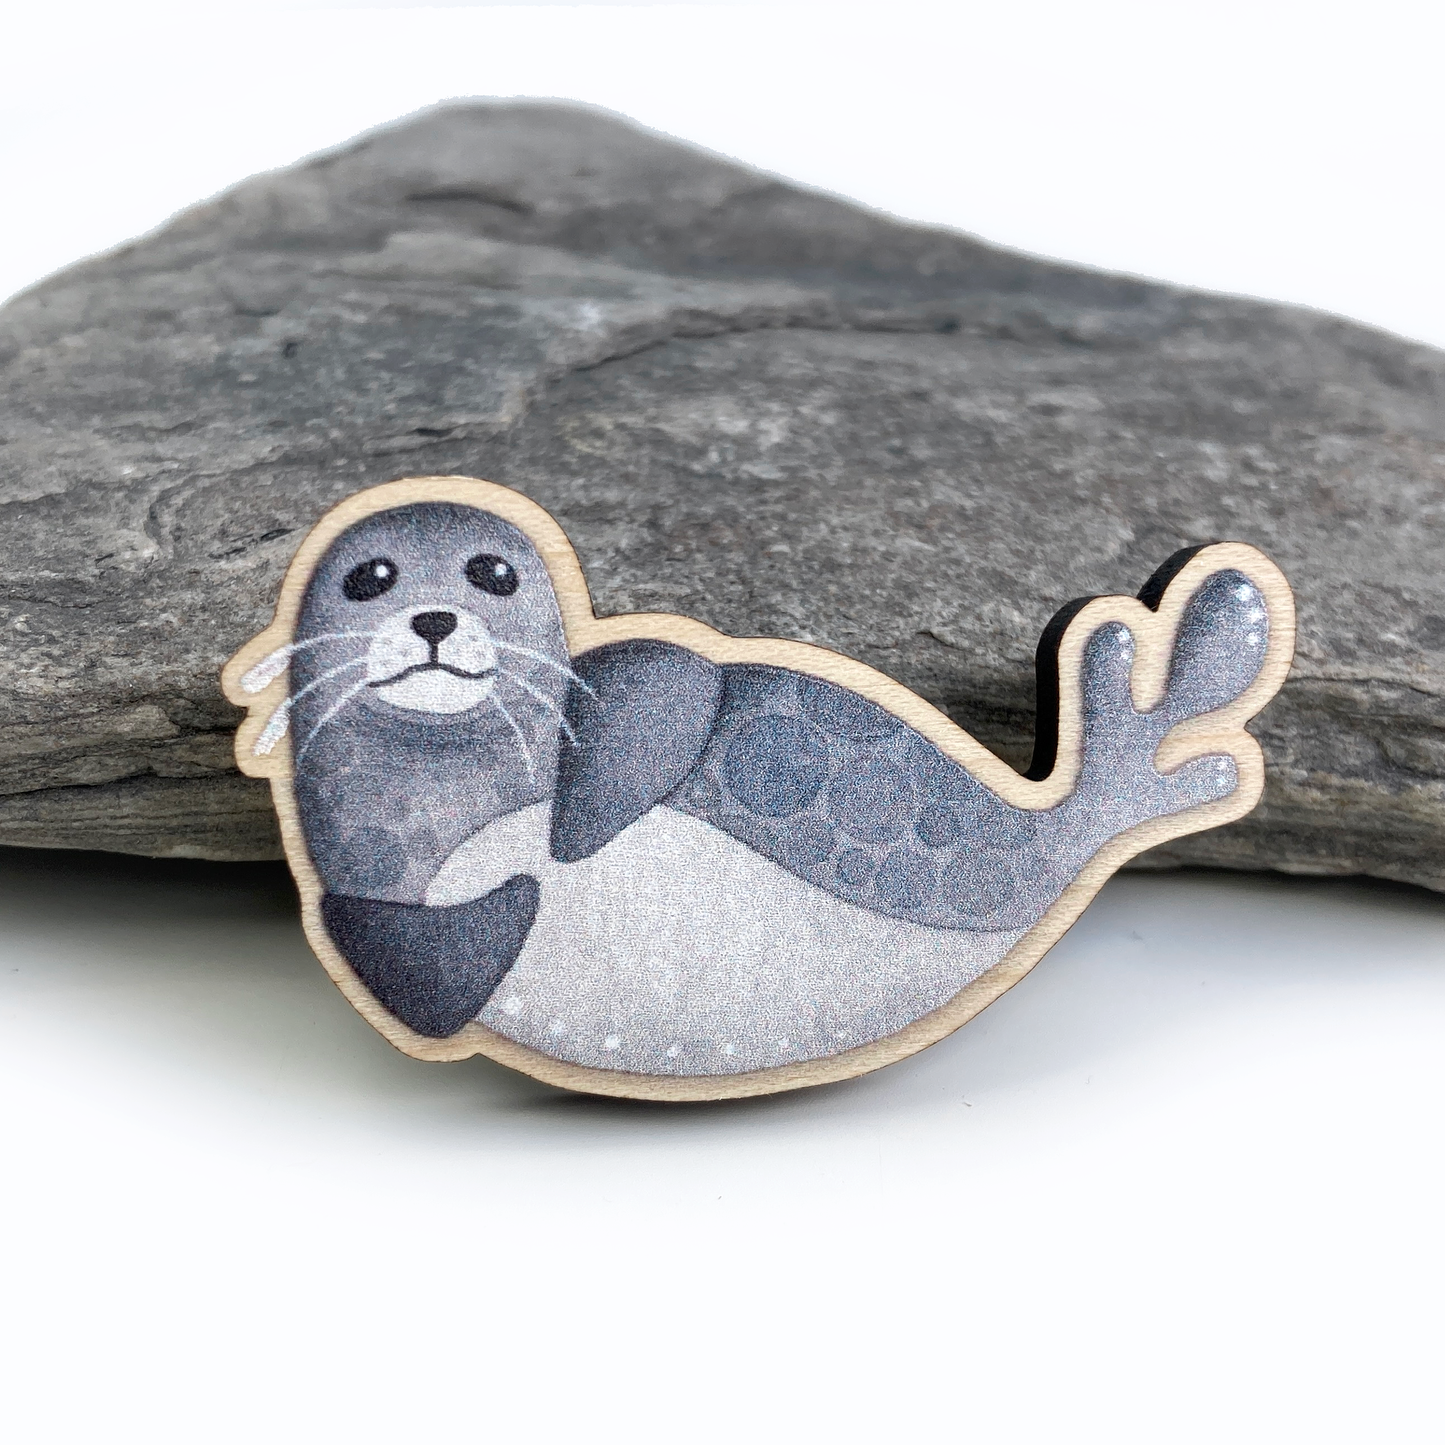 Wooden Fridge Magnet Set x4 - Seagull, Puffins and Seal - Save £4